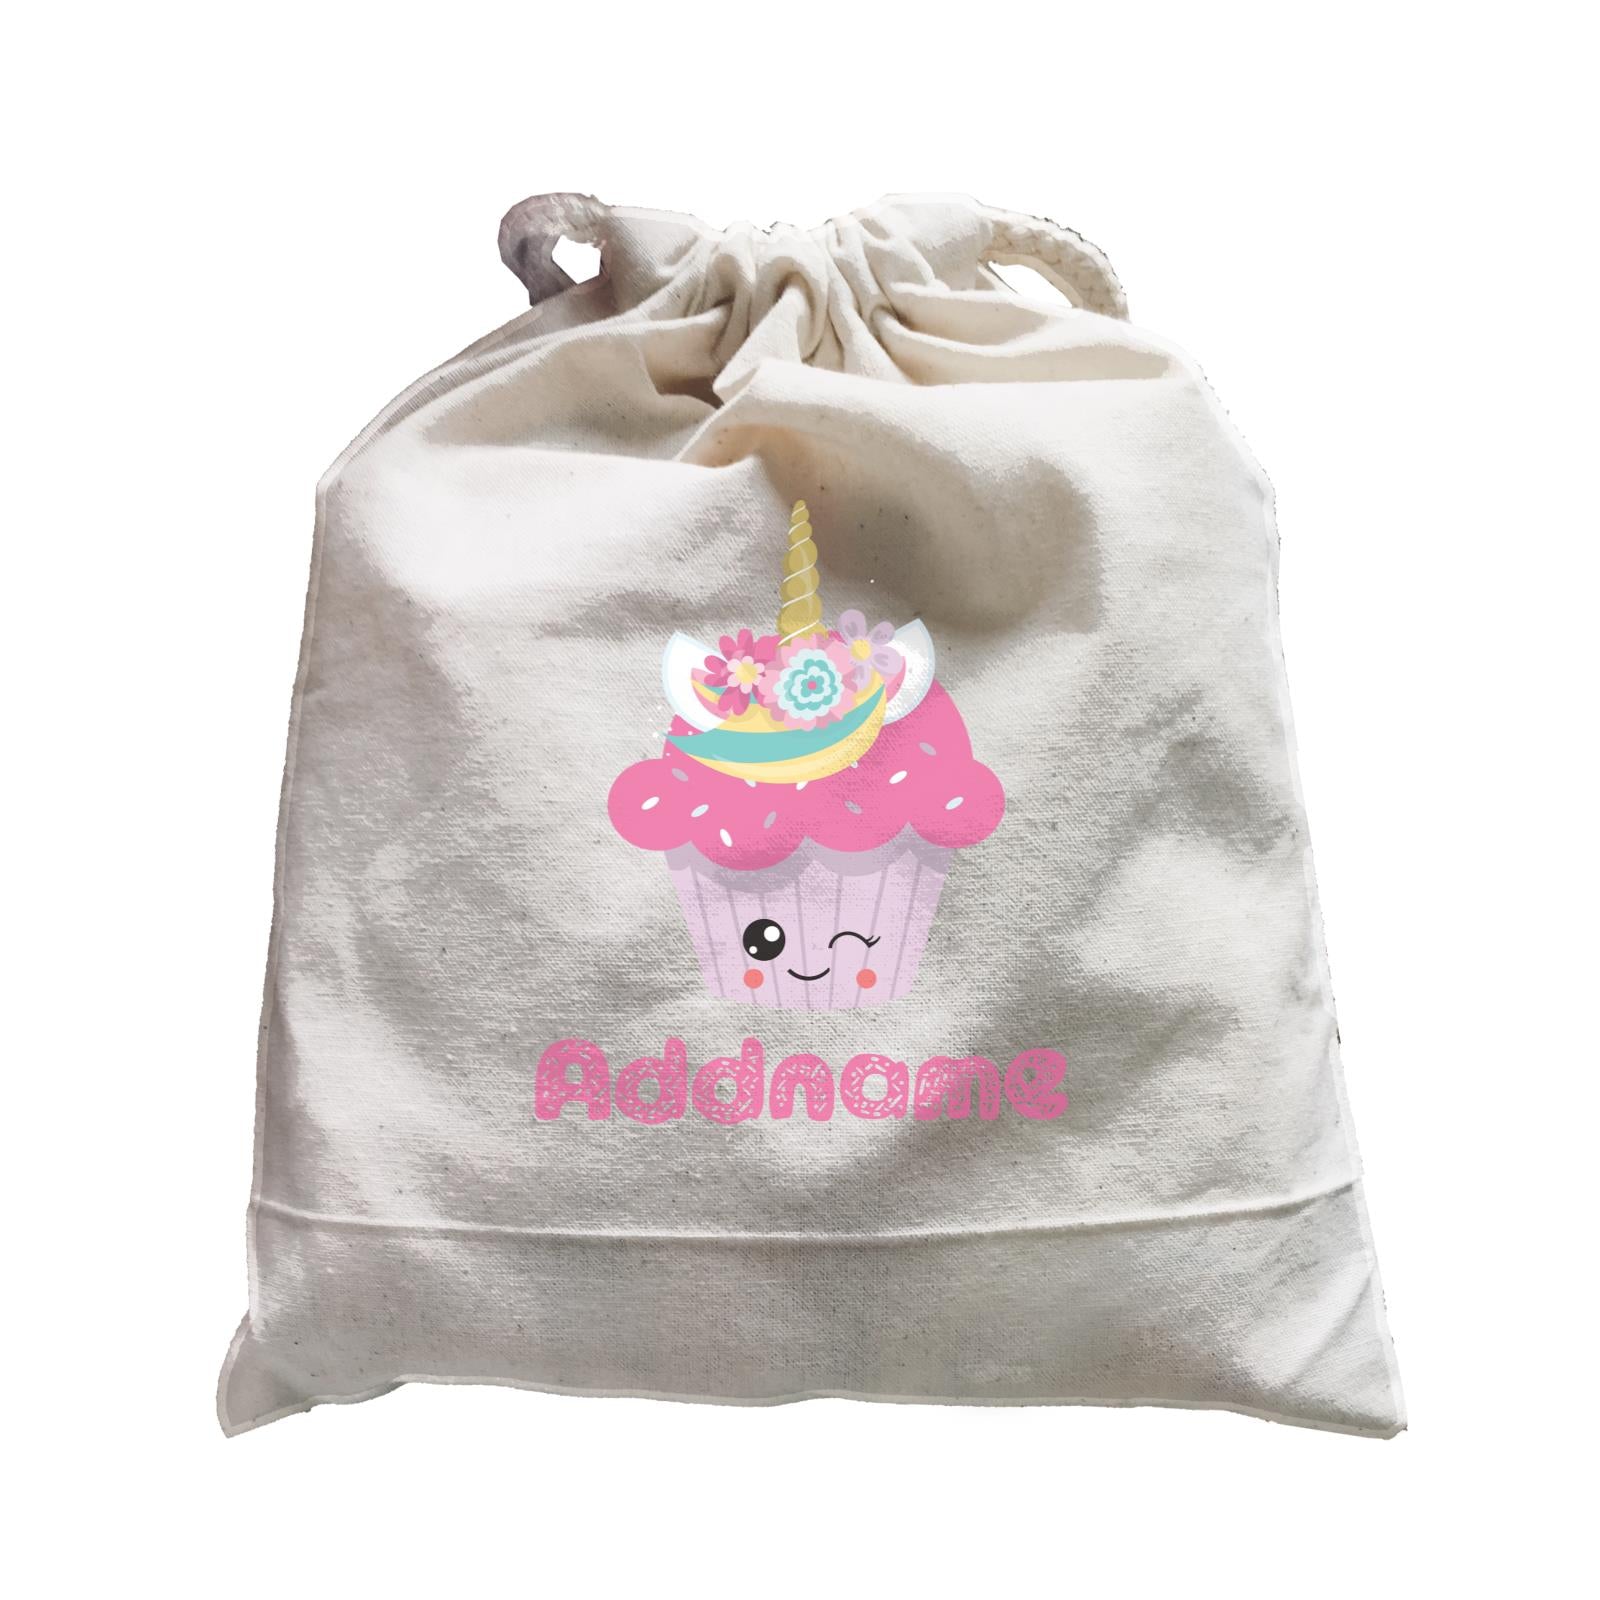 Magical Sweets Purple Cupcake Winking Addname Satchel